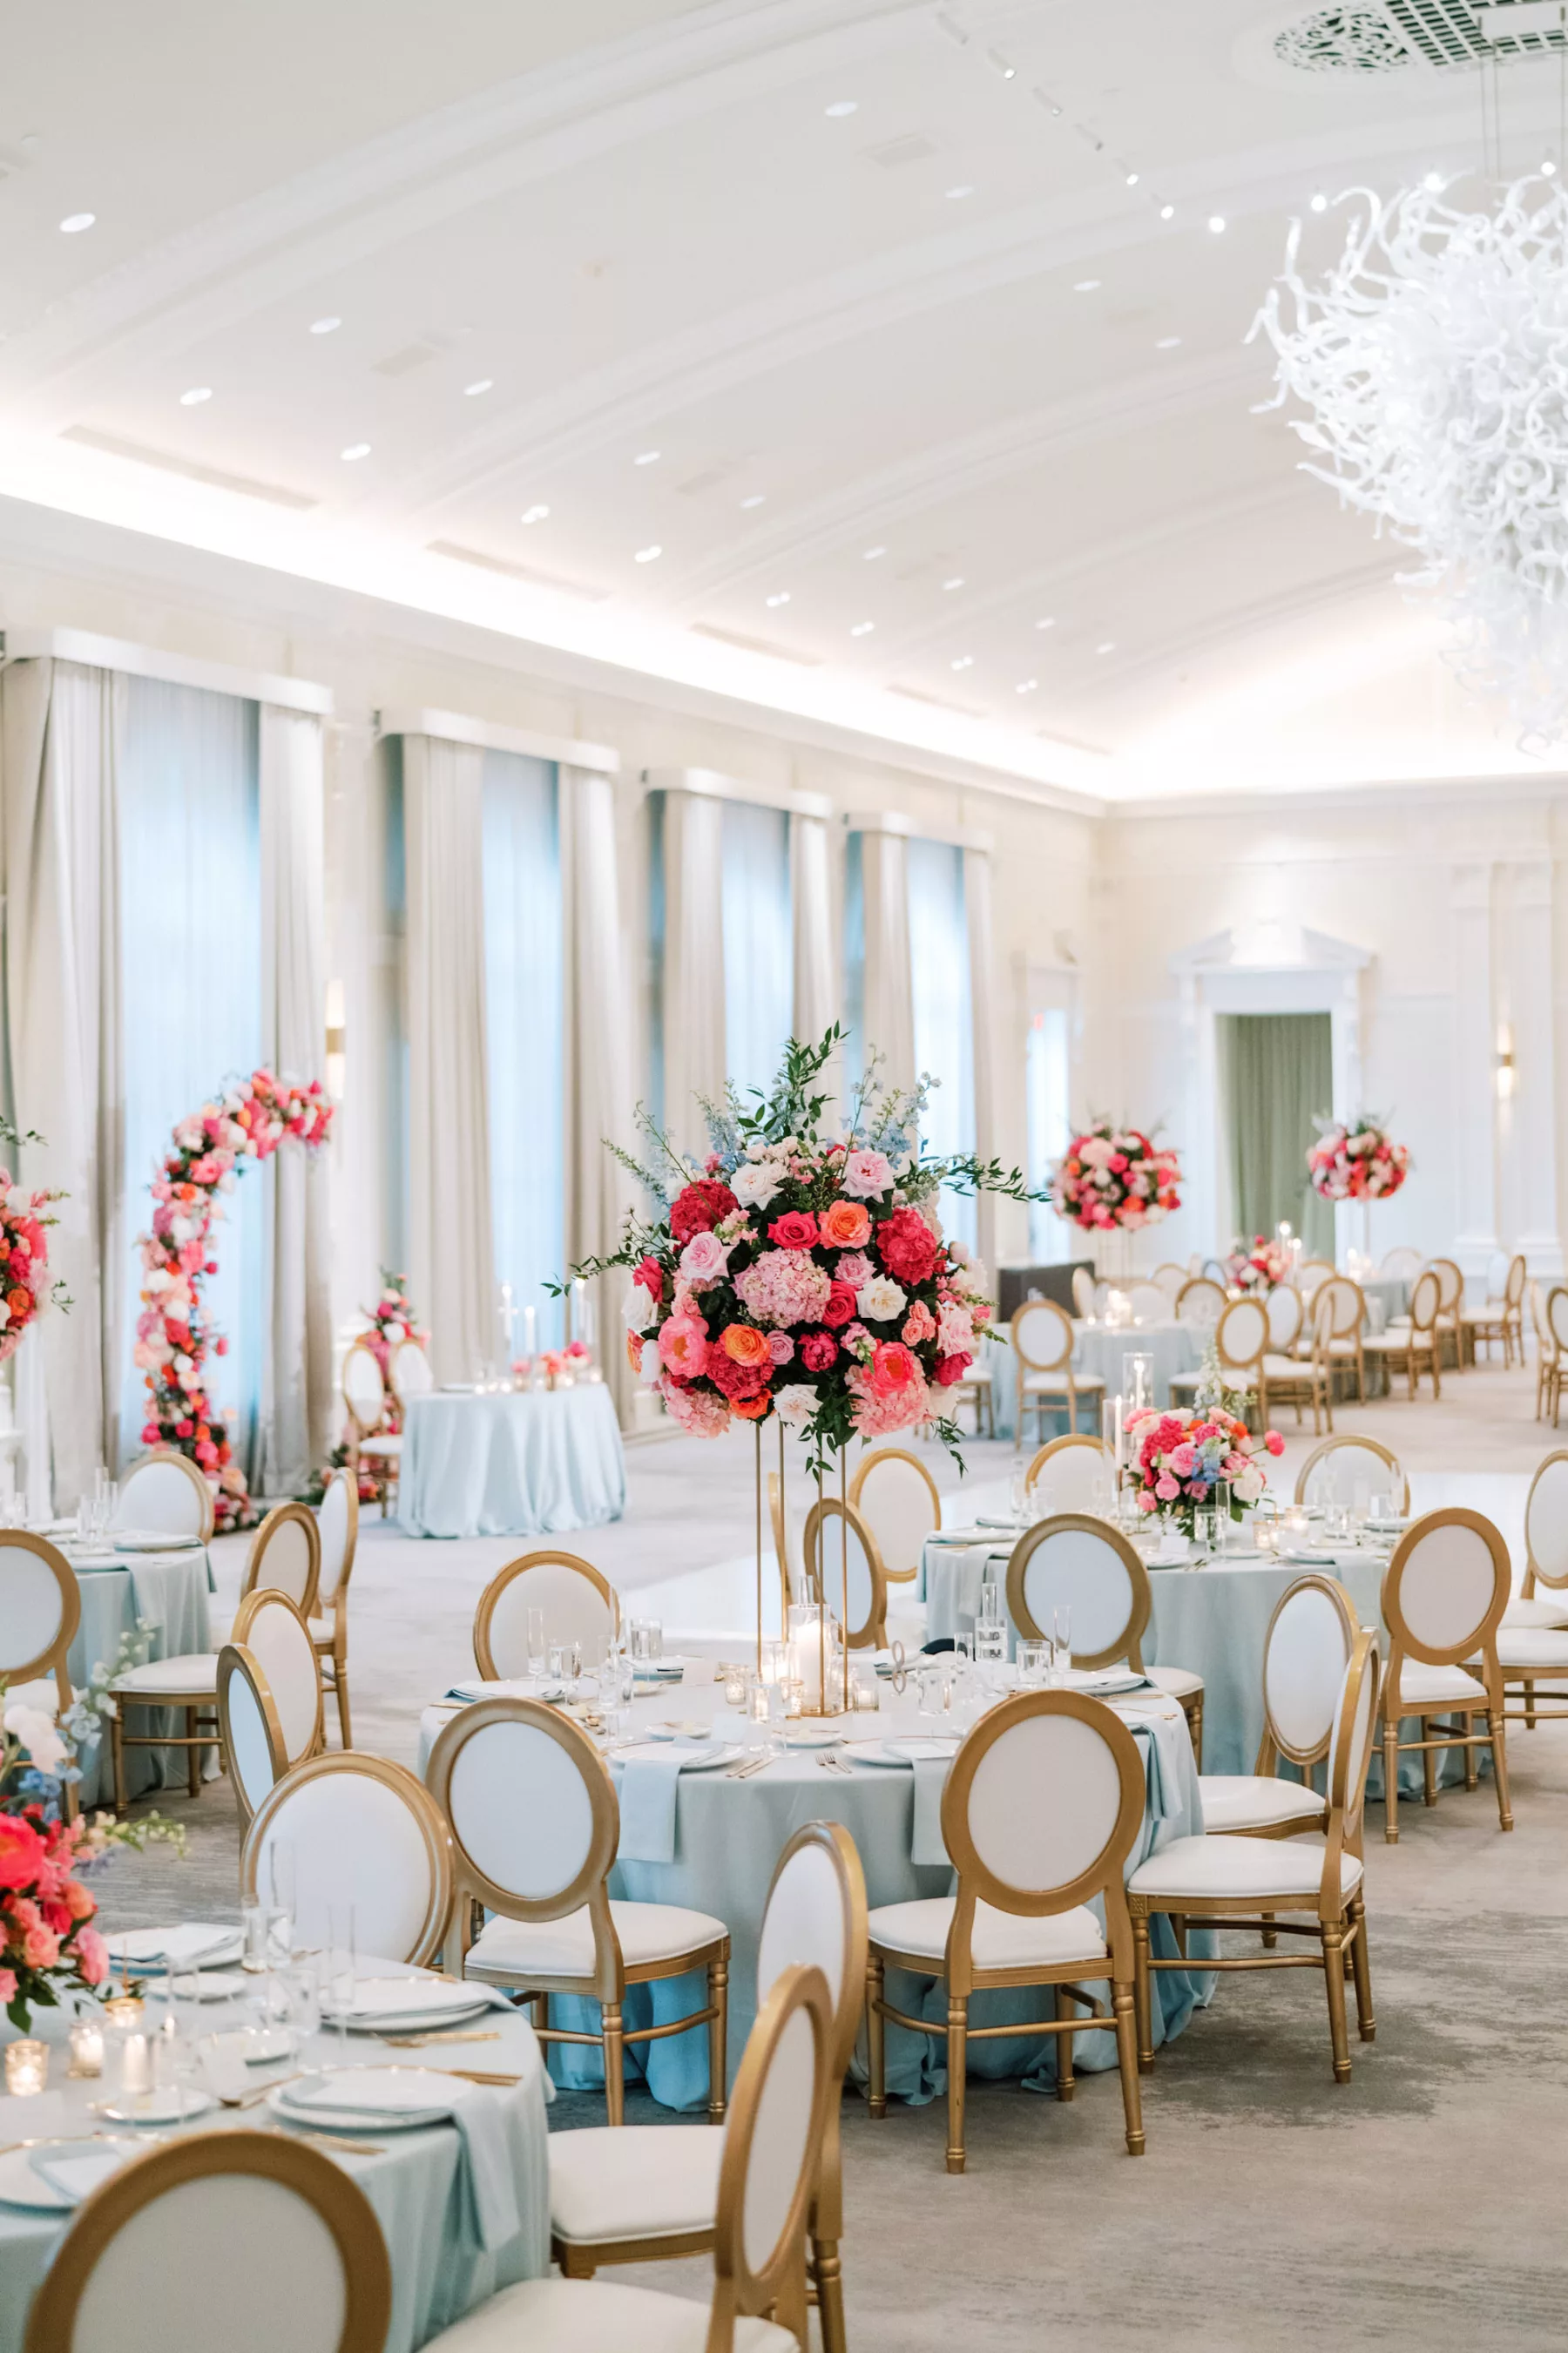 Luxurious Pink and Blue Summer Ballroom Wedding Reception Decor Ideas | Tall Flower Stand with Pink Anemones and Hydrangeas, Orange Garden Roses, Blue Stock Flowers | Elegant Gold and White Chairs | Tampa Bay Florist Bruce Wayne Florals | Kate Ryan Event Rentals | Planner Parties A La Carte | Venue The Vinoy 